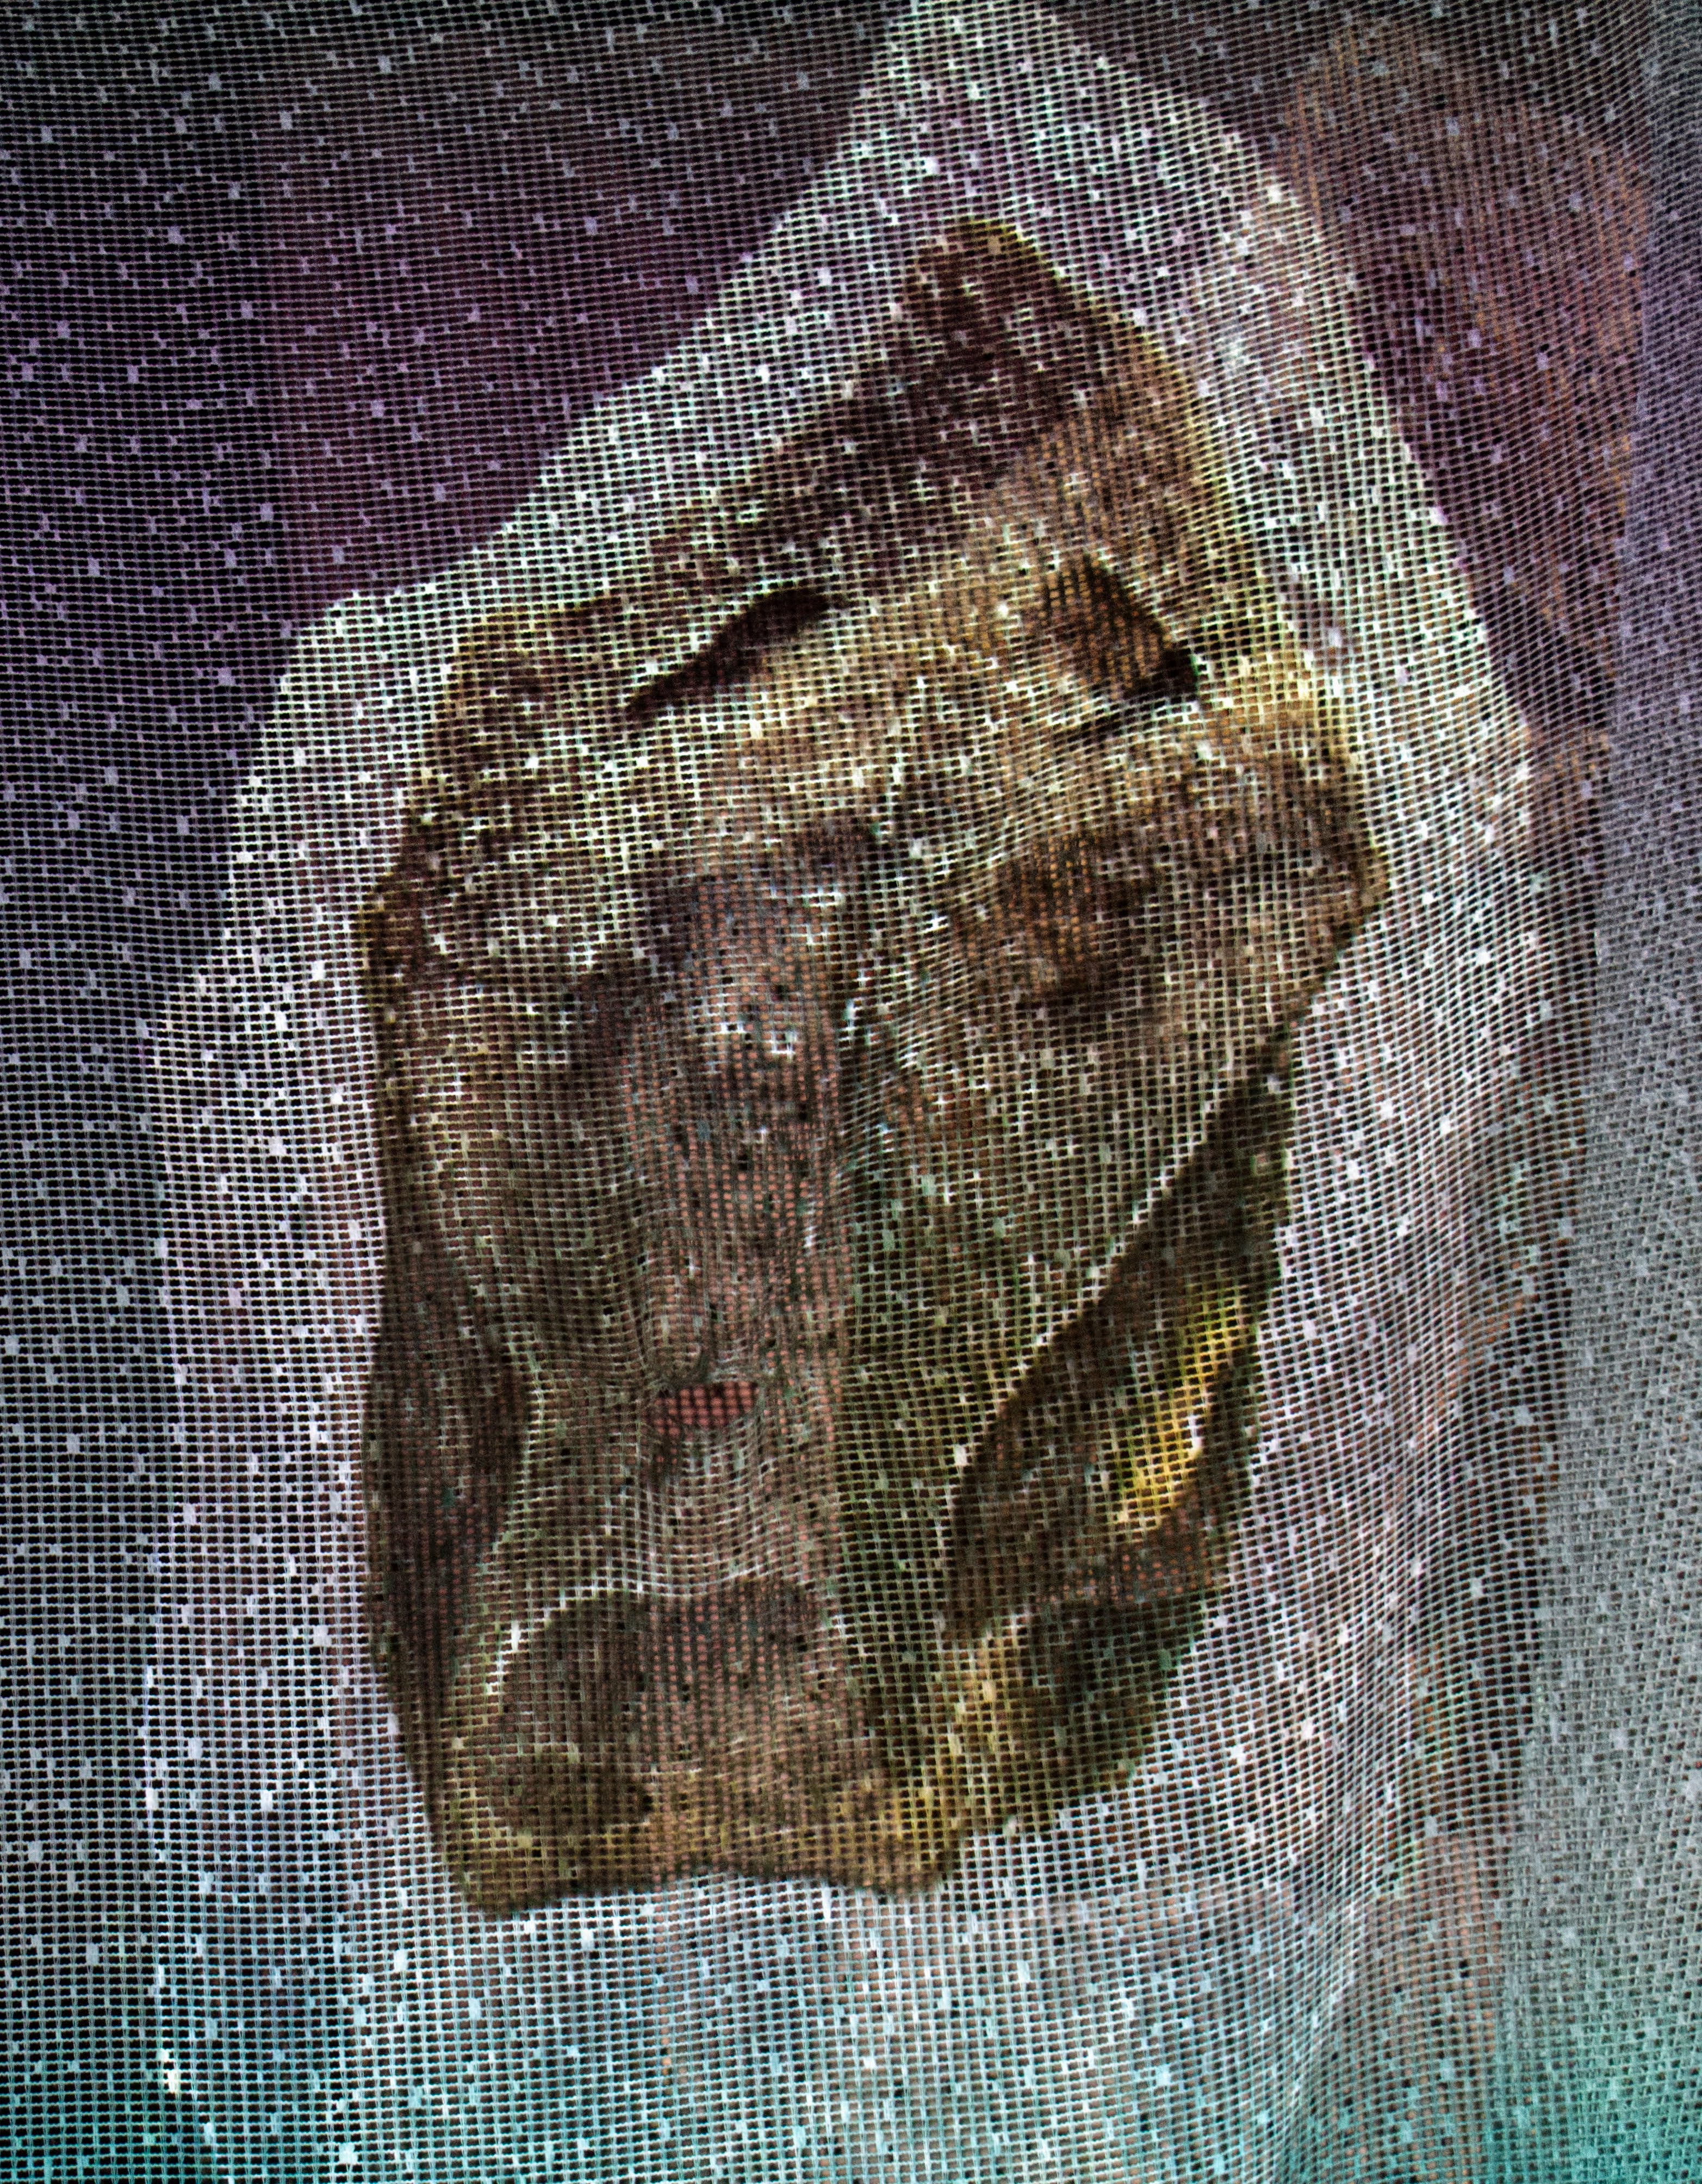 A still from a video of algorithimically generated stones projected onto a lace mesh